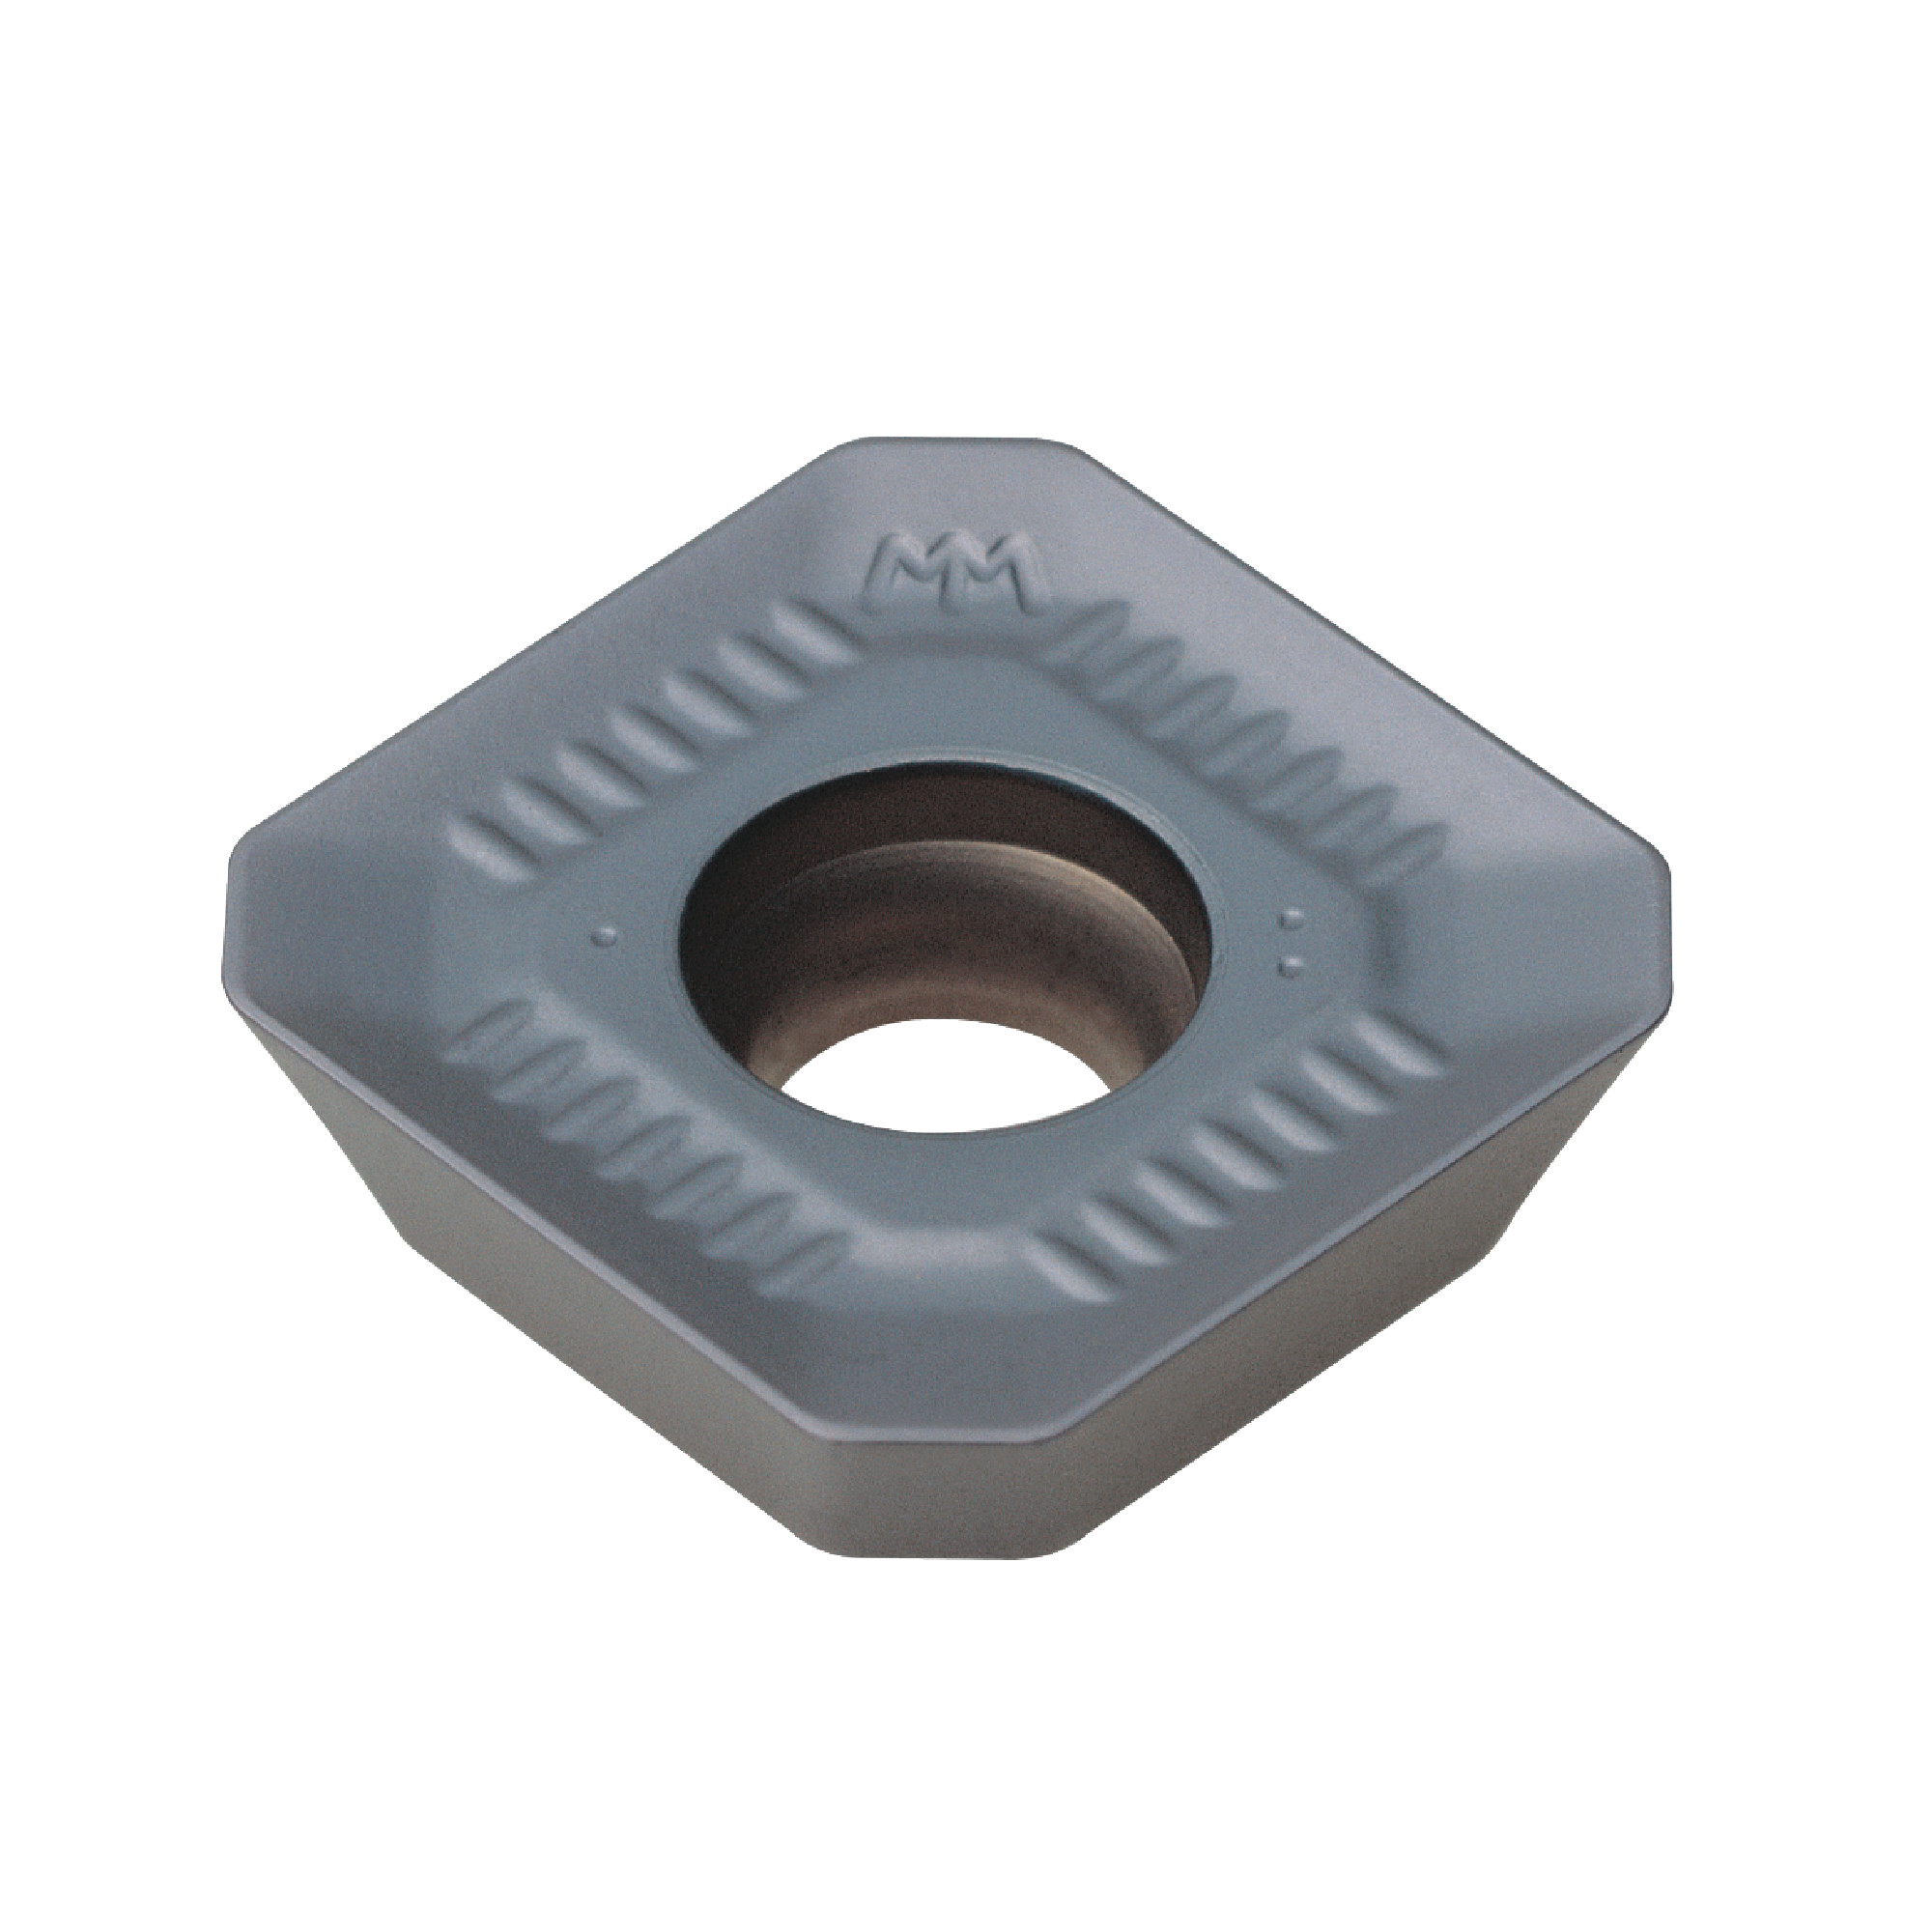 KORLOY - SEXT14M4AGSN-MM PC6510 Square / INDEXABLE Carbide MILLING INSERT